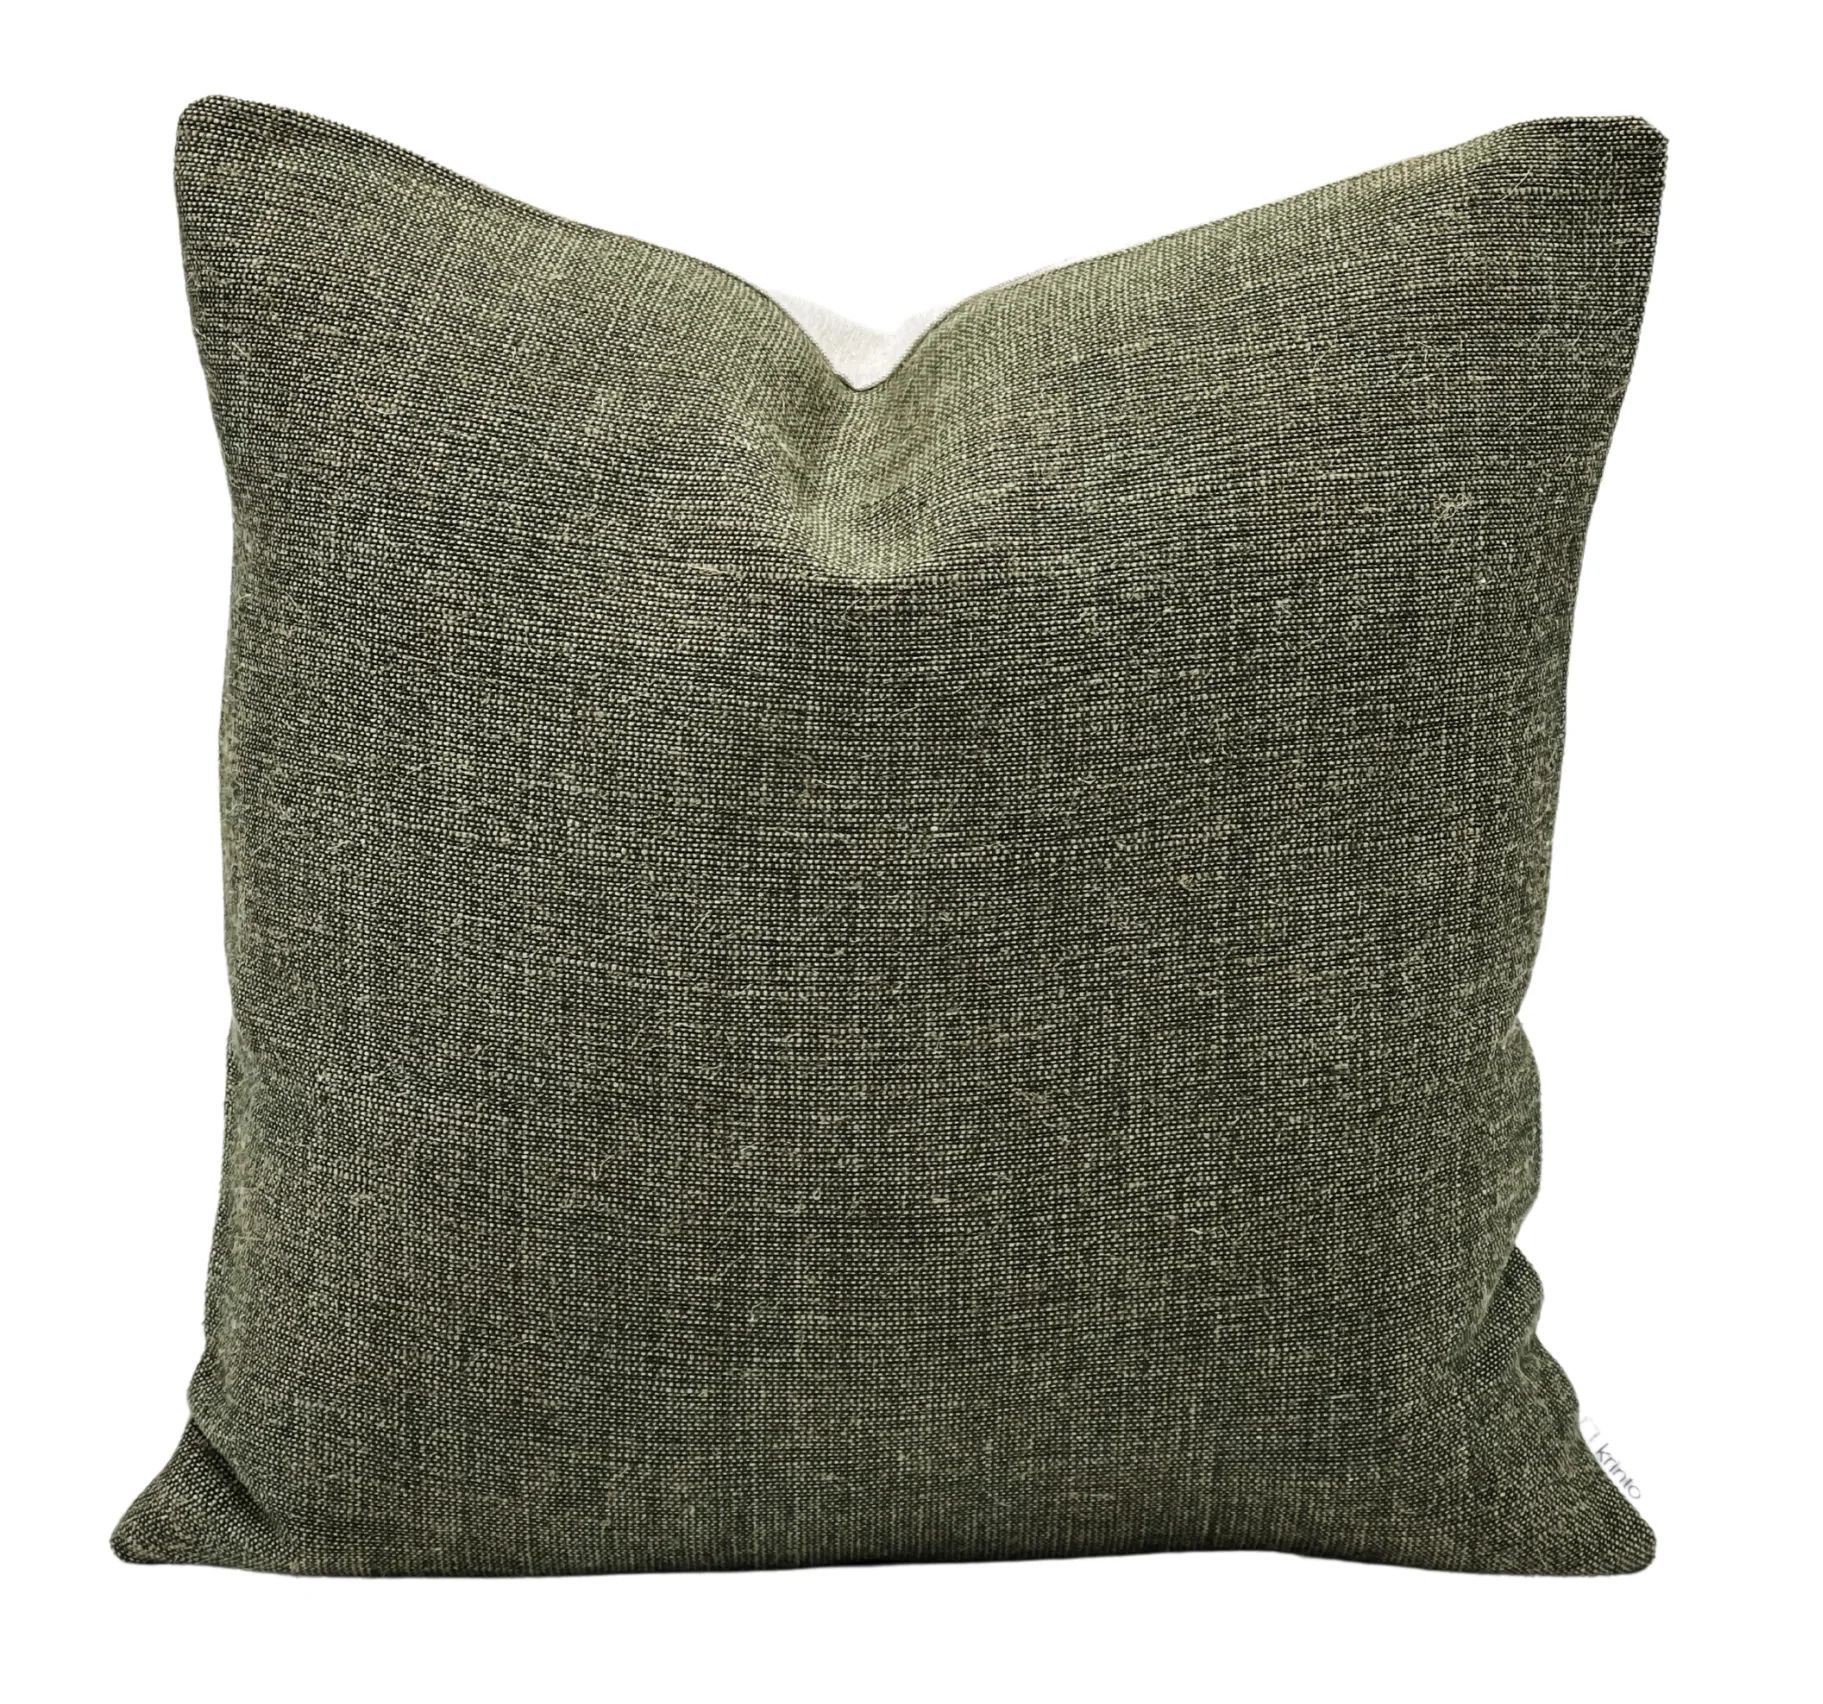 Rustic Solids in Olive Green Pillow Cover | Krinto